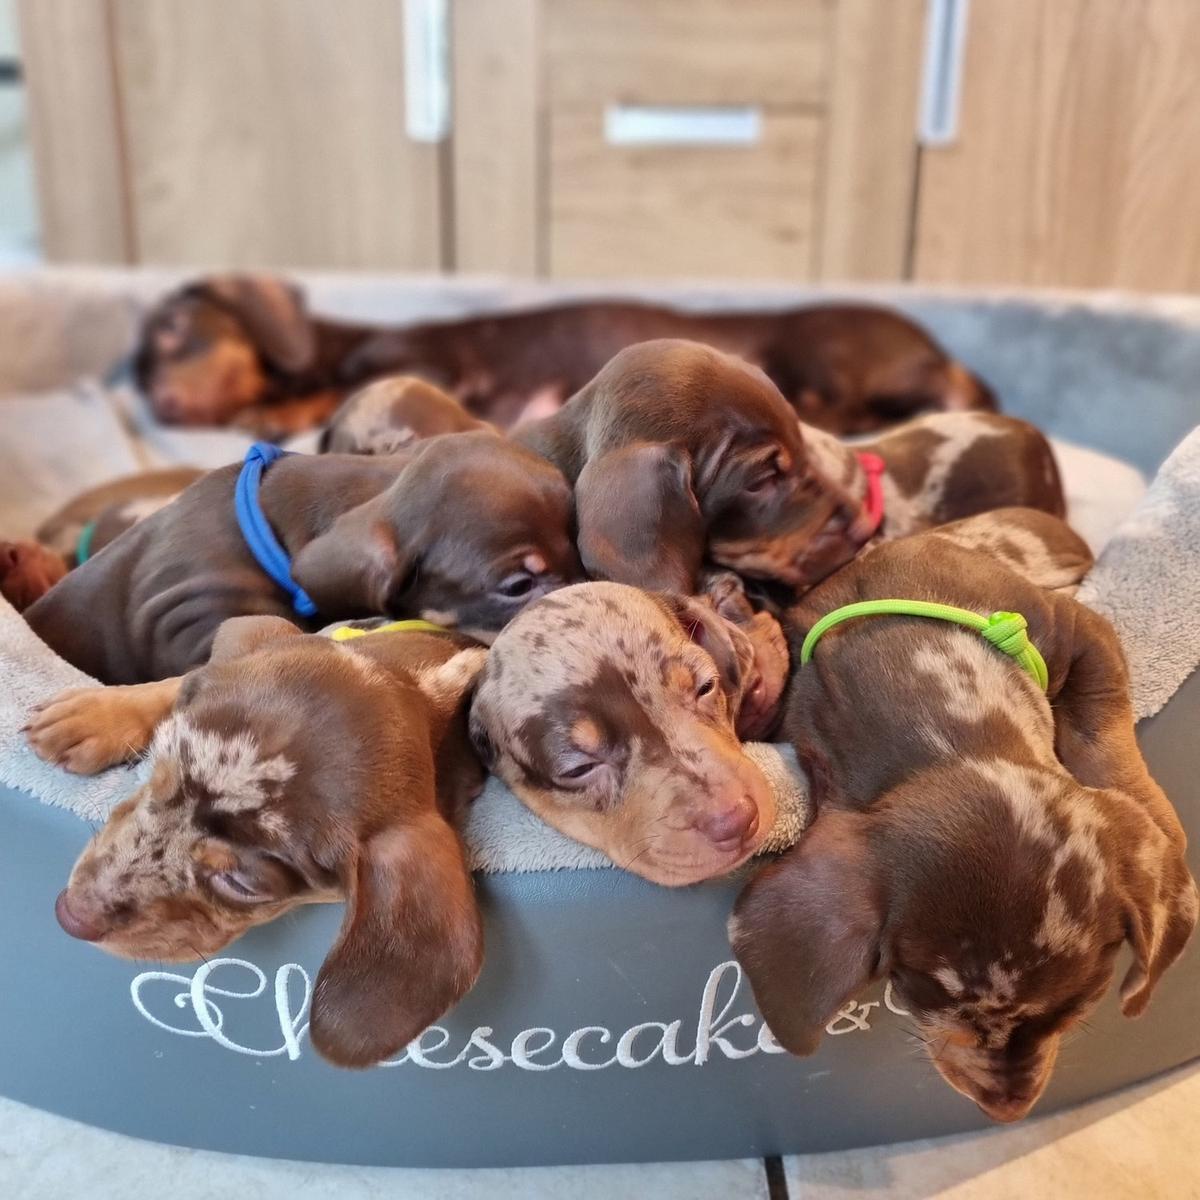 The 10 puppies were asleep. (Courtesy of Caters News)